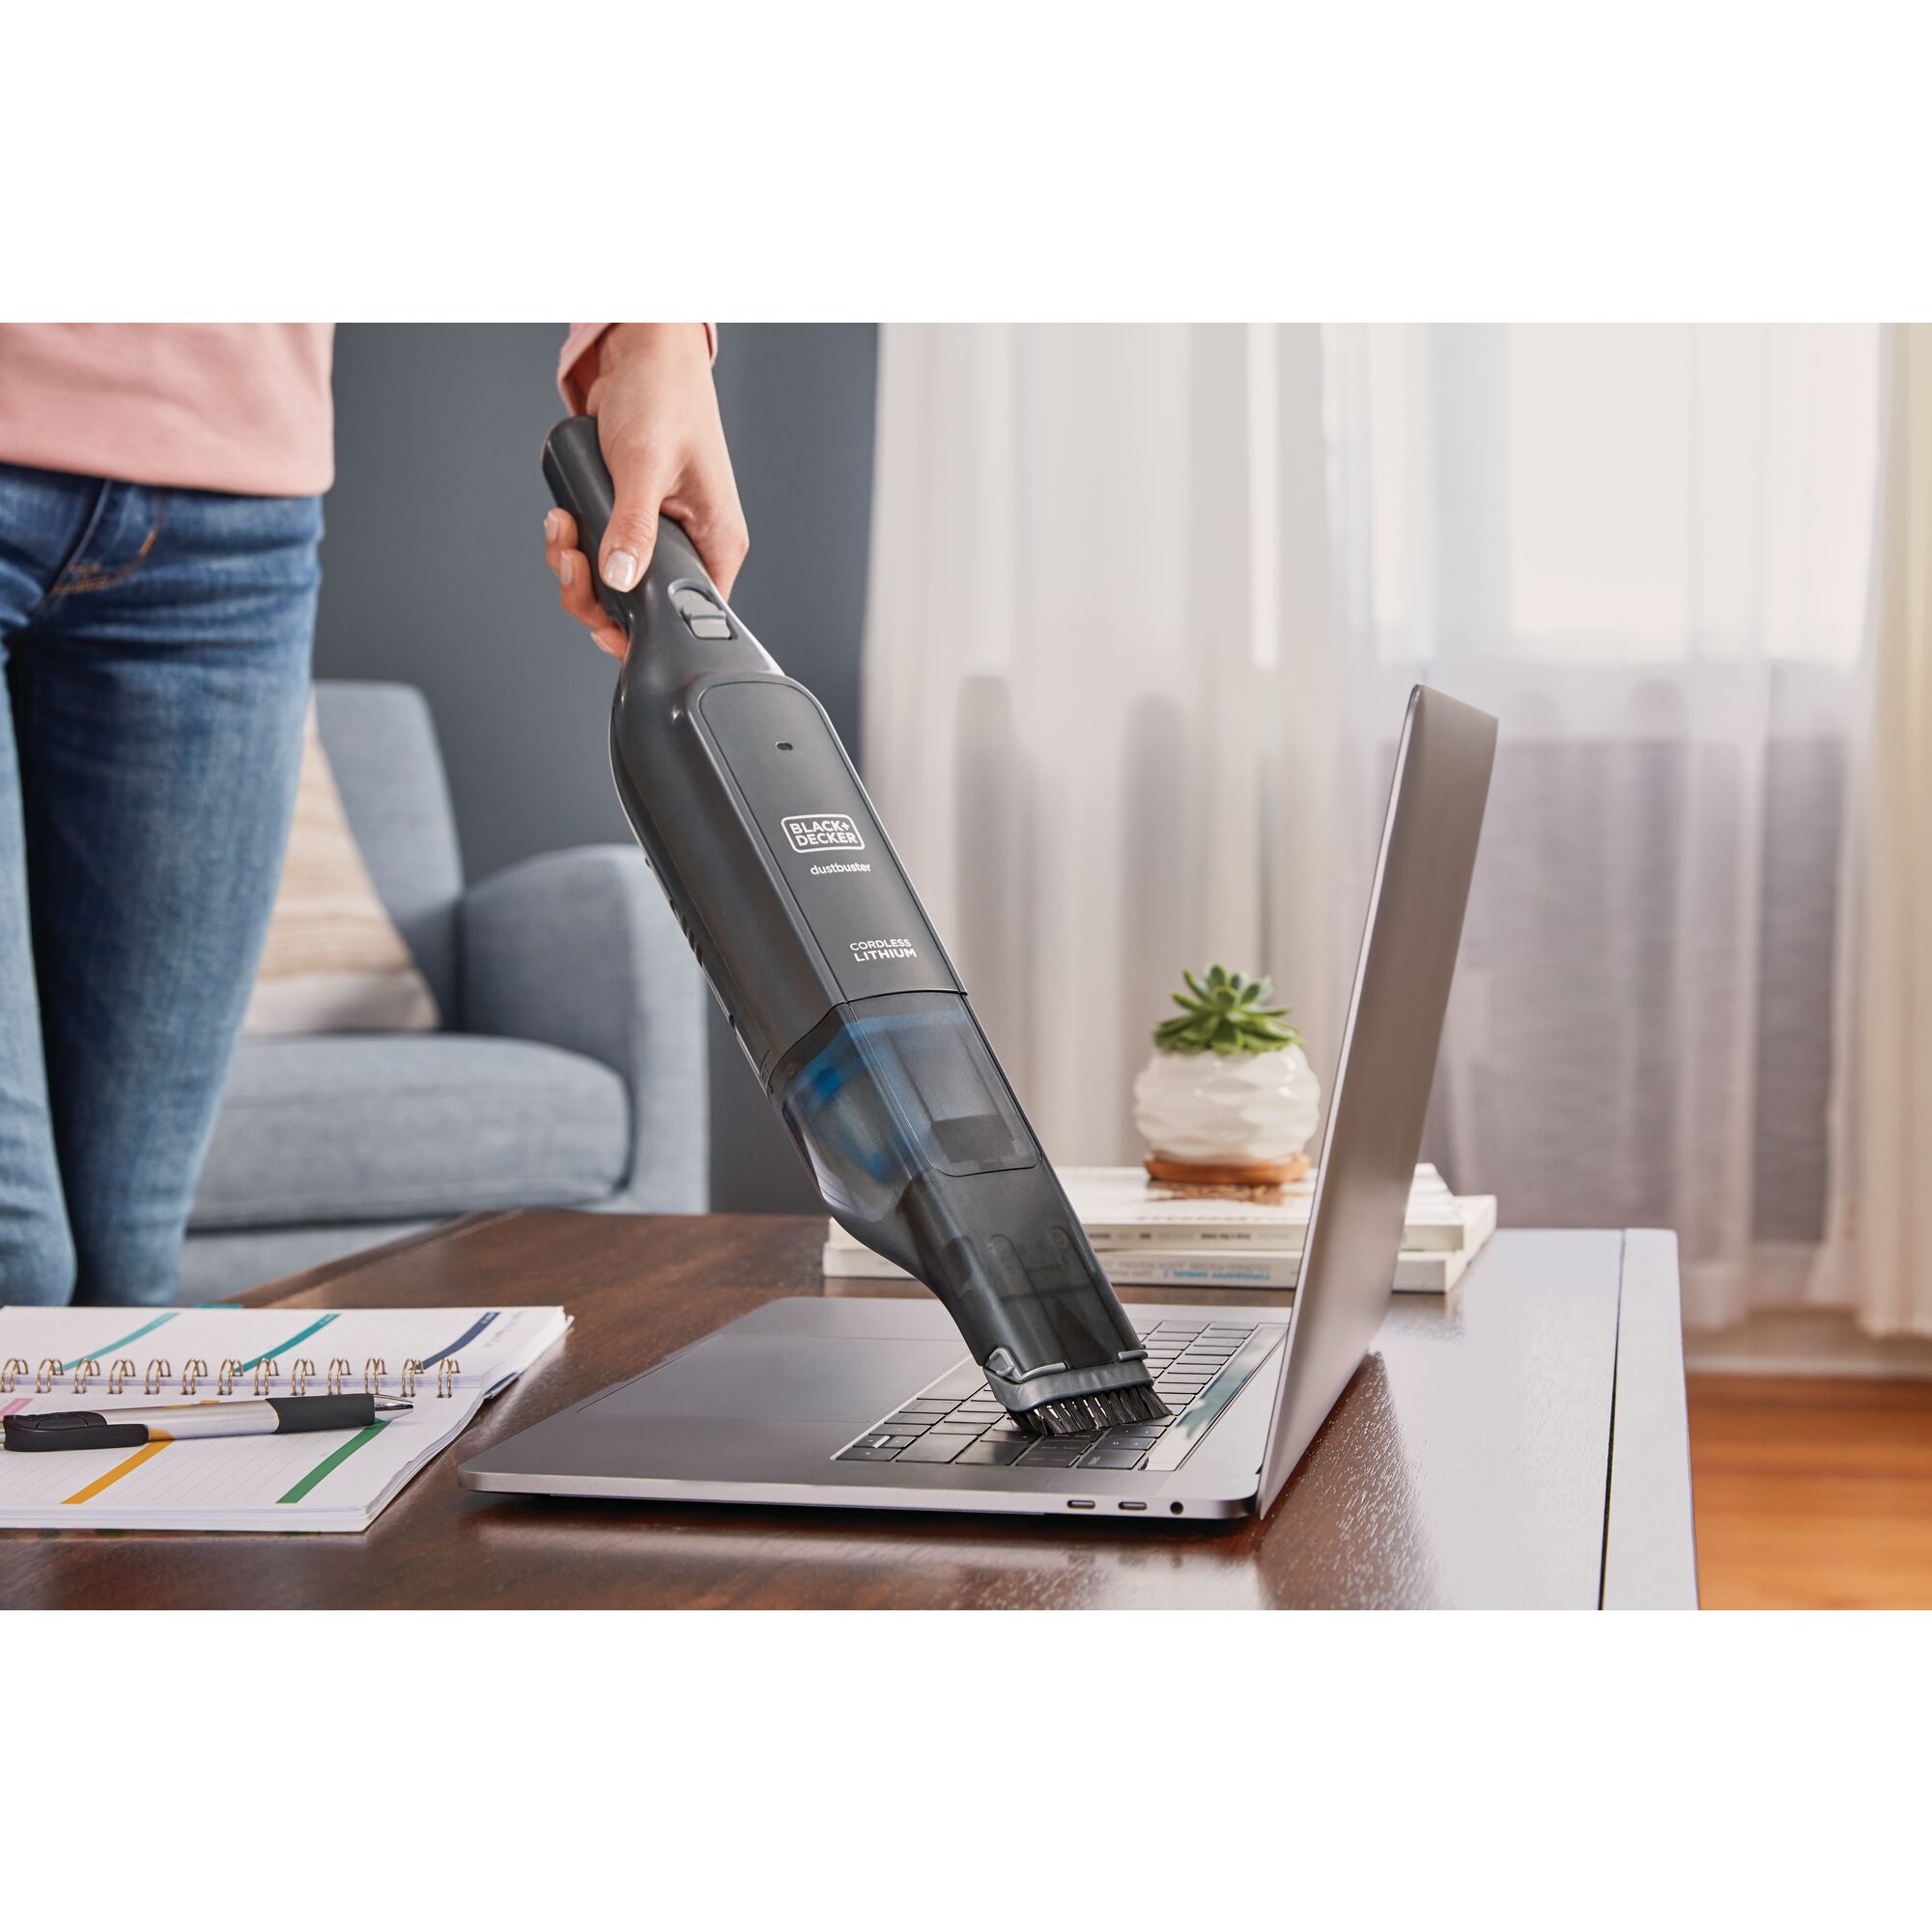 BLACK+DECKER AIRSWIVEL Versatile Corded Bagless Upright Vacuum in the  Upright Vacuums department at